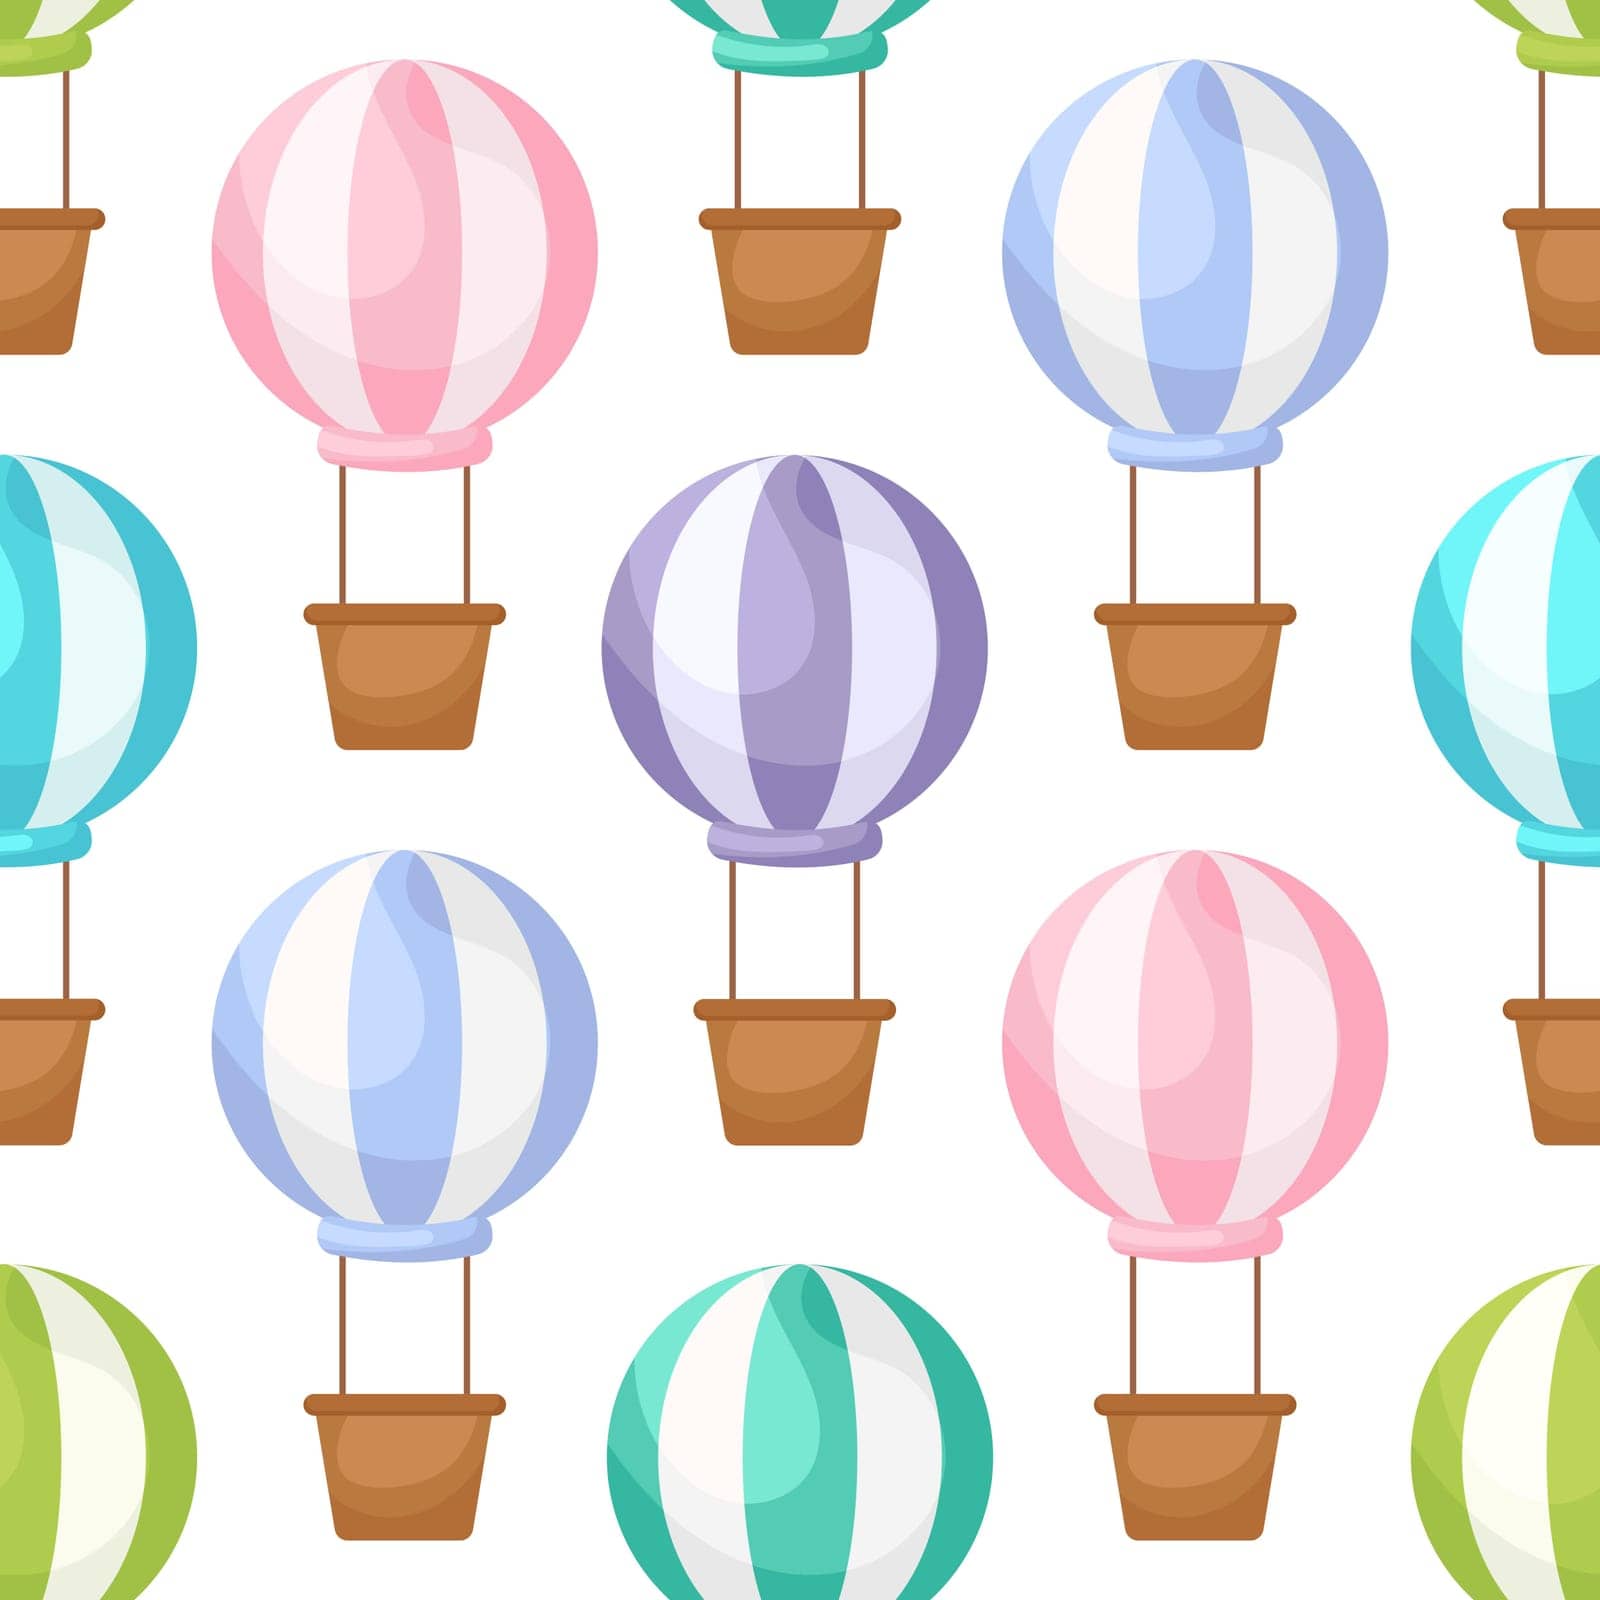 Cute children's seamless pattern with hot air balloons. Creative kids texture for fabric, wrapping, textile, wallpaper, apparel. Vector illustration.